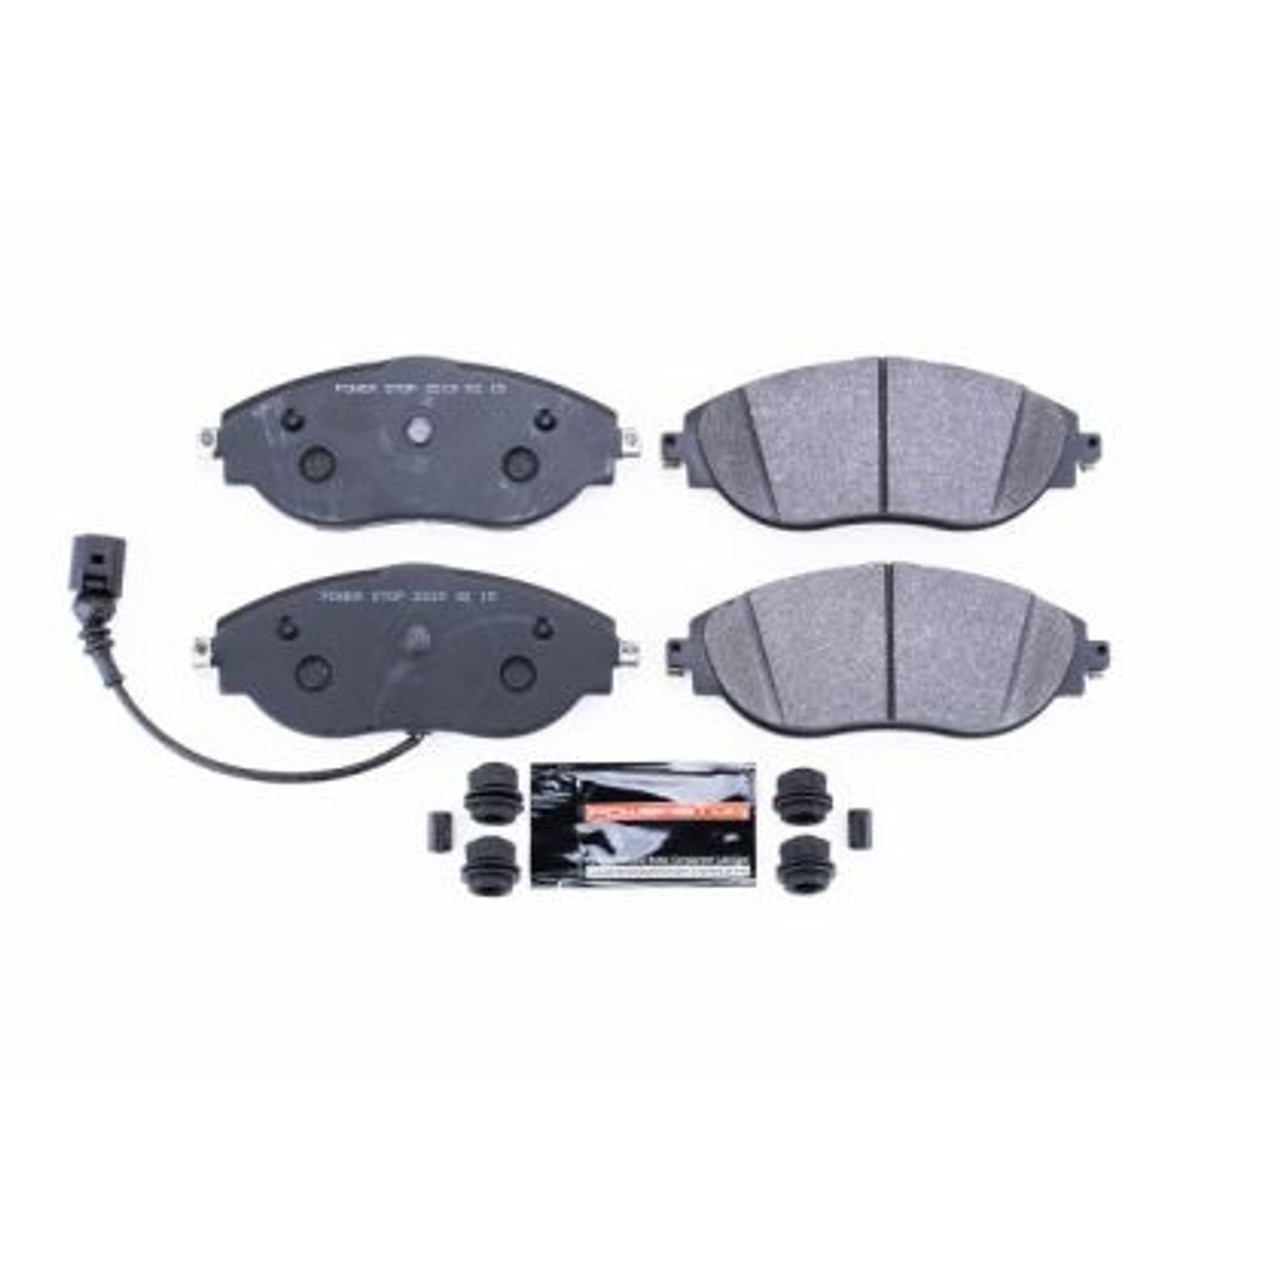 PowerStop Track Day Spec Front Brake Pads (fits MQB 340mm rotors)